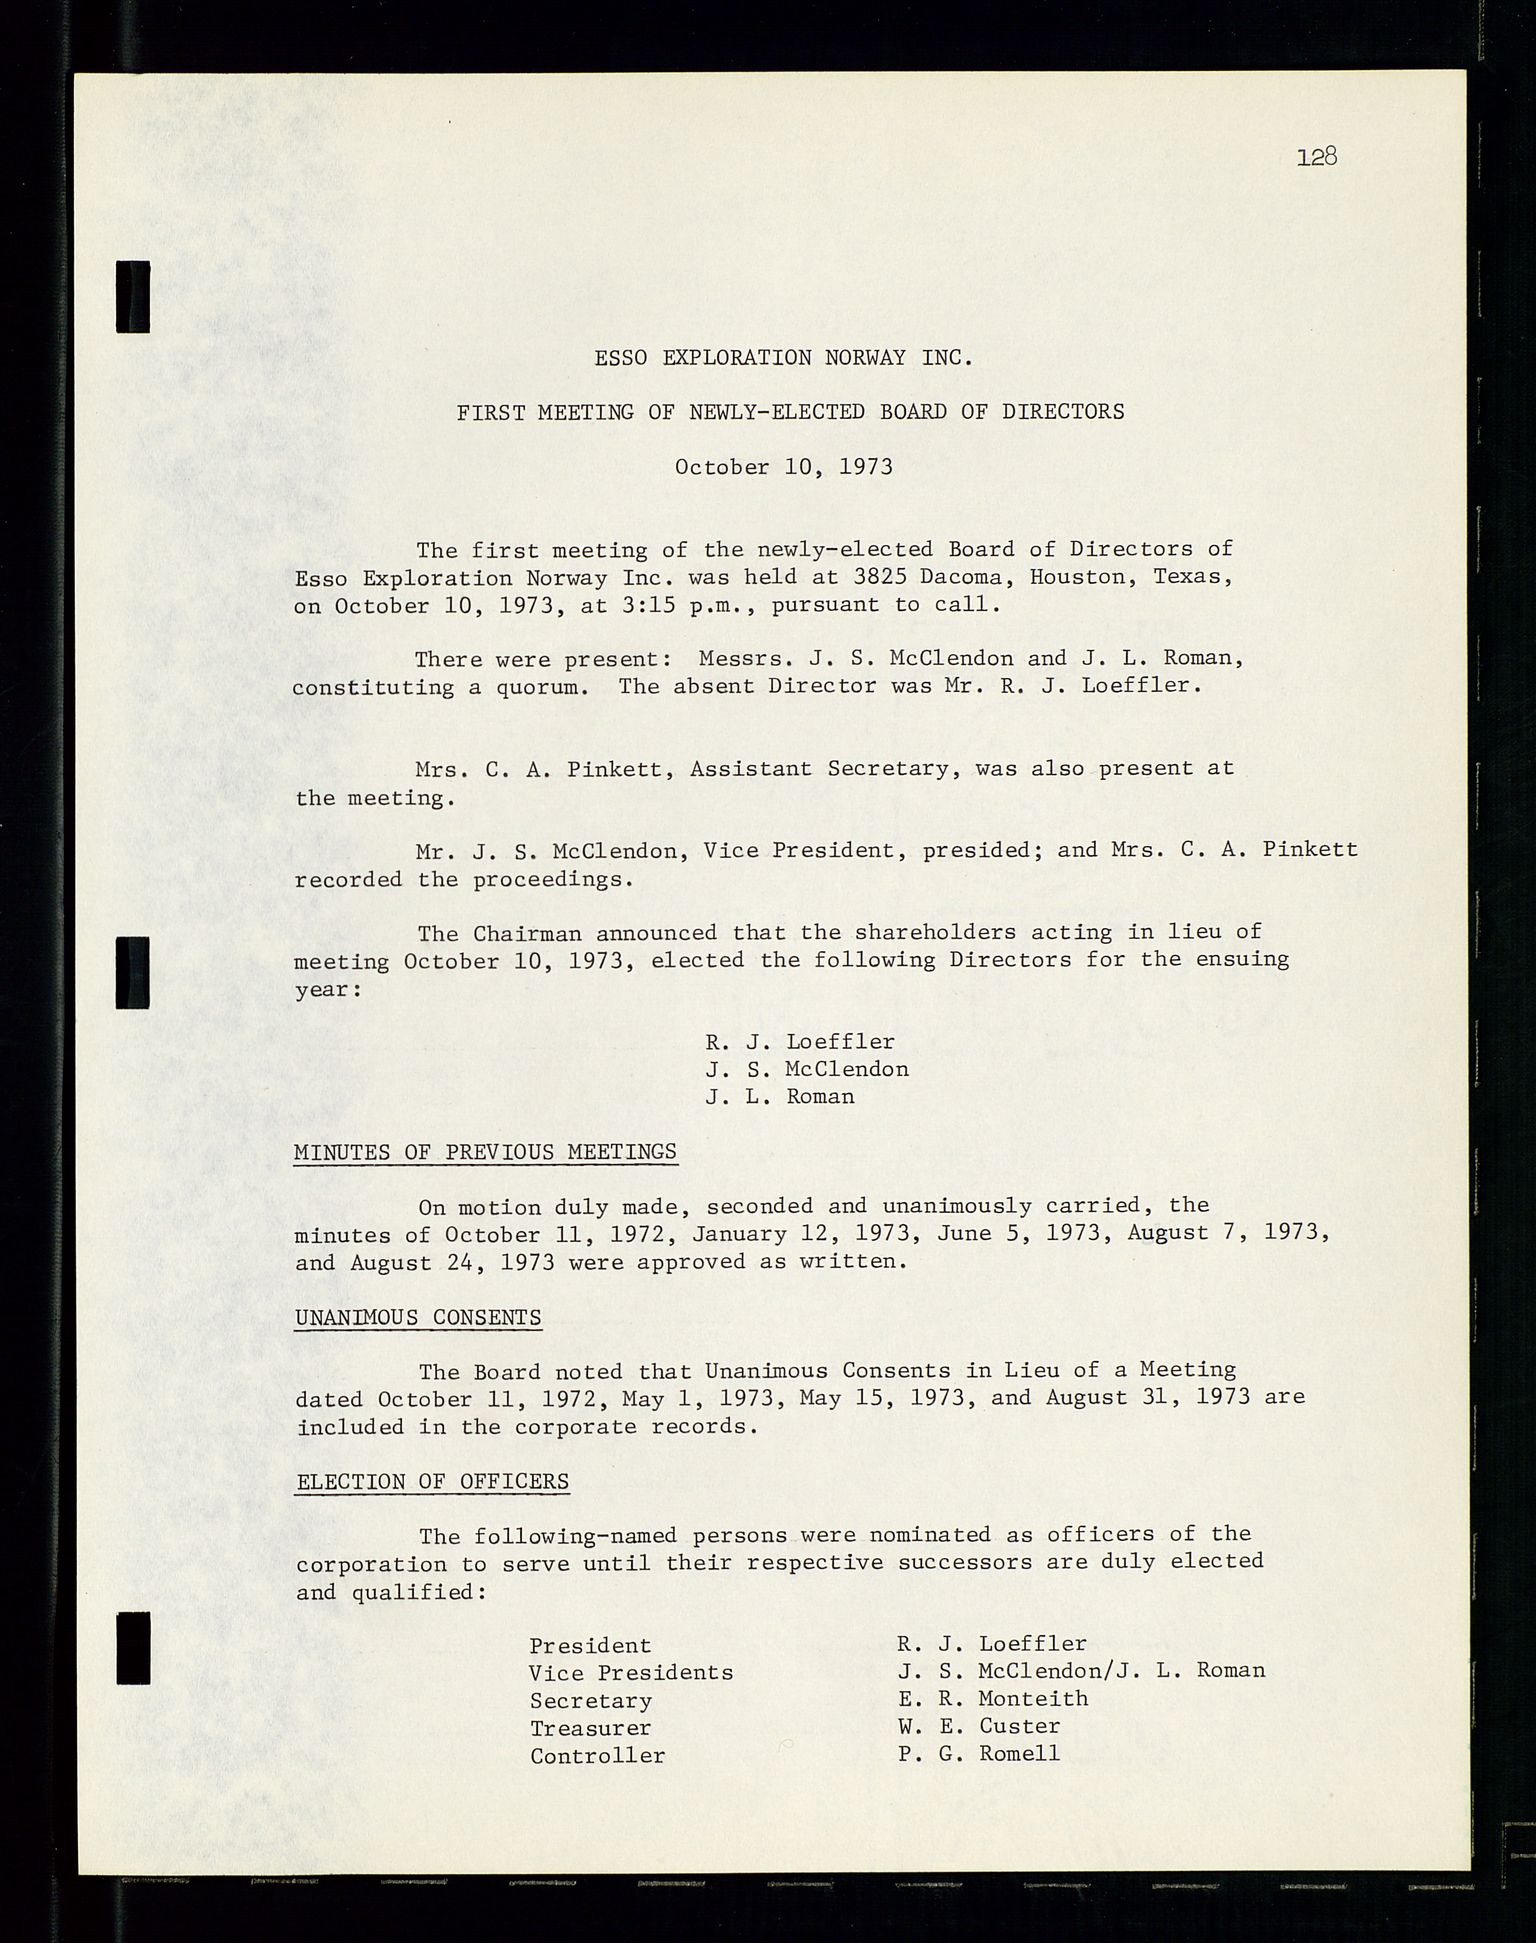 Pa 1512 - Esso Exploration and Production Norway Inc., SAST/A-101917/A/Aa/L0001/0001: Styredokumenter / Corporate records, By-Laws, Board meeting minutes, Incorporations, 1965-1975, p. 128